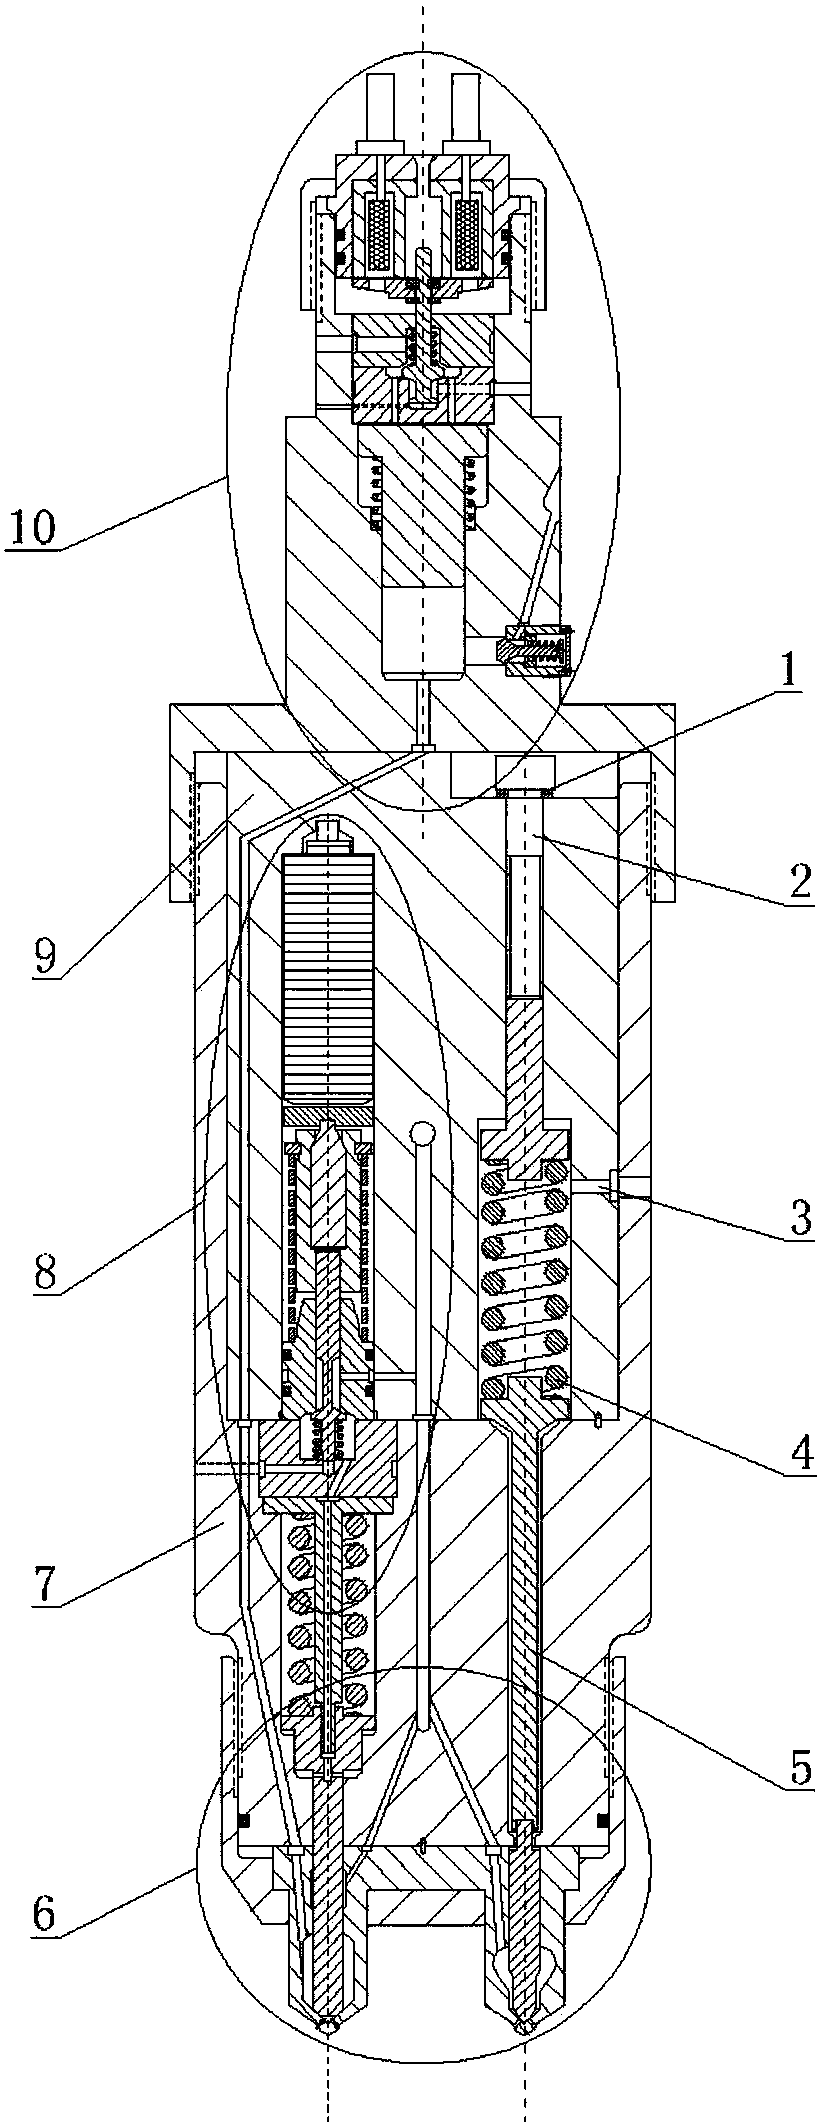 Combined Mechanical Injection-Boost Piezojet Mixed Fuel Injection Device